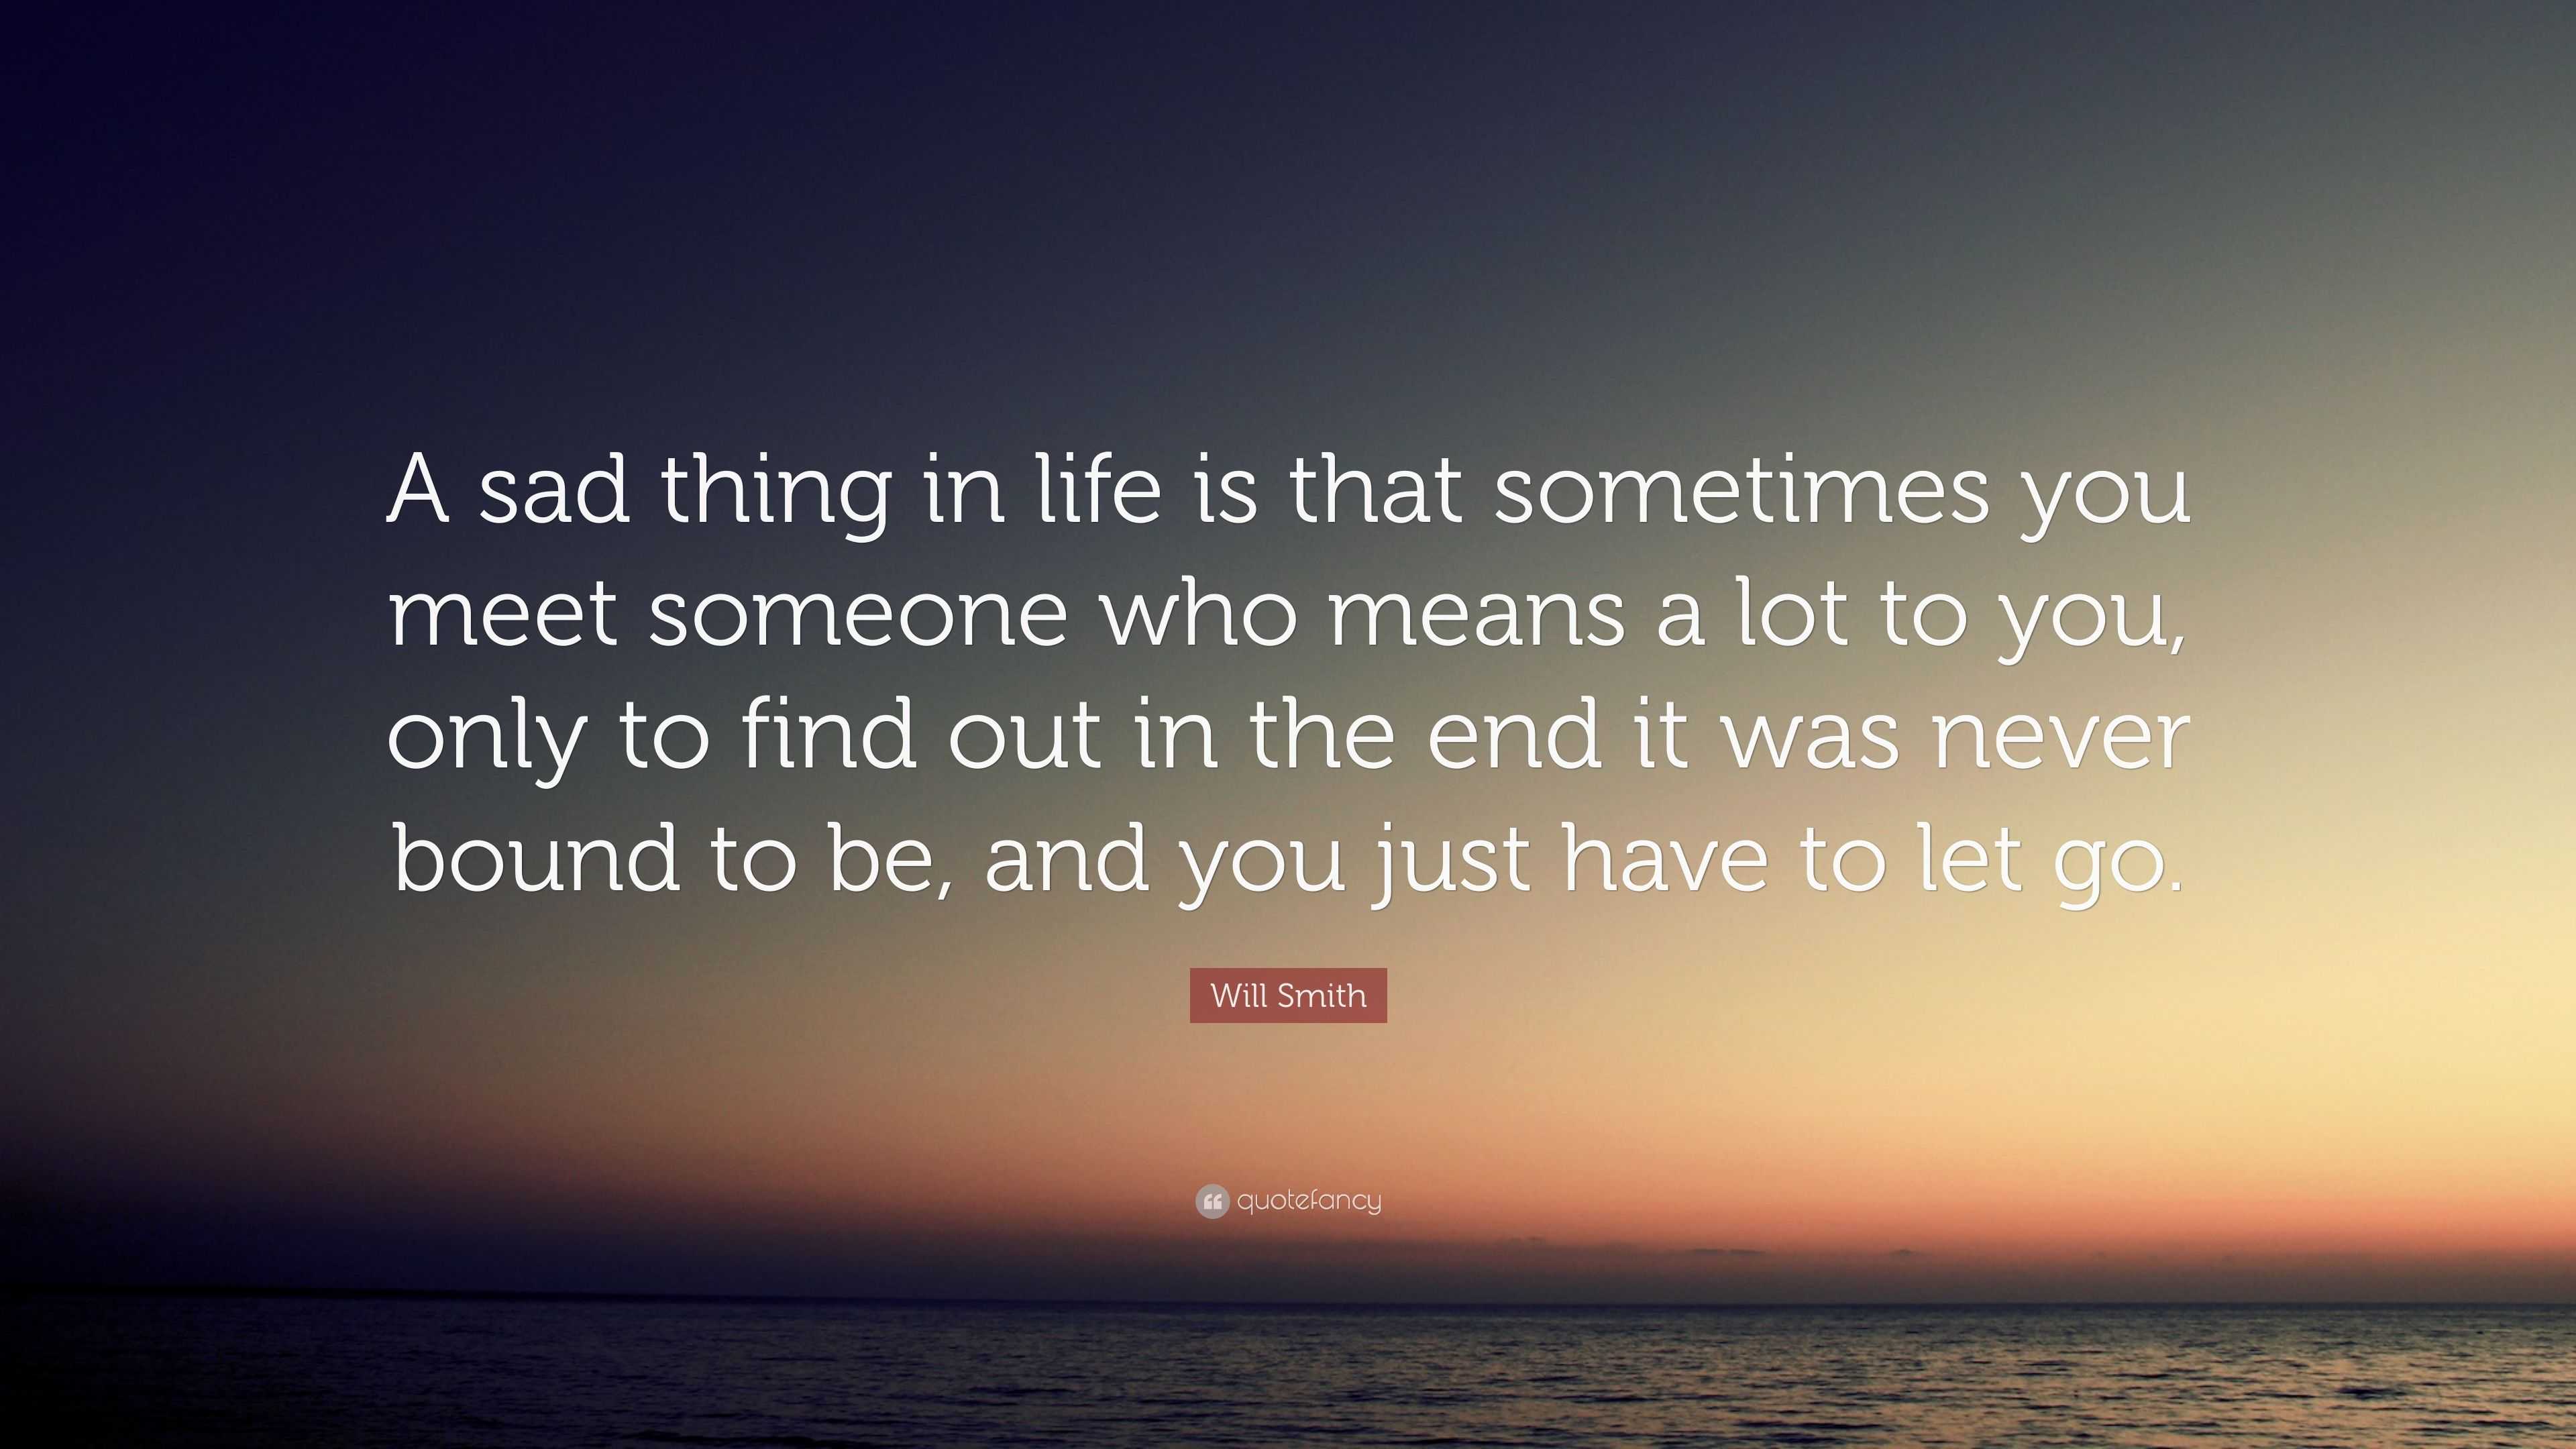 Will Smith Quote “A sad thing in life is that sometimes you meet someone